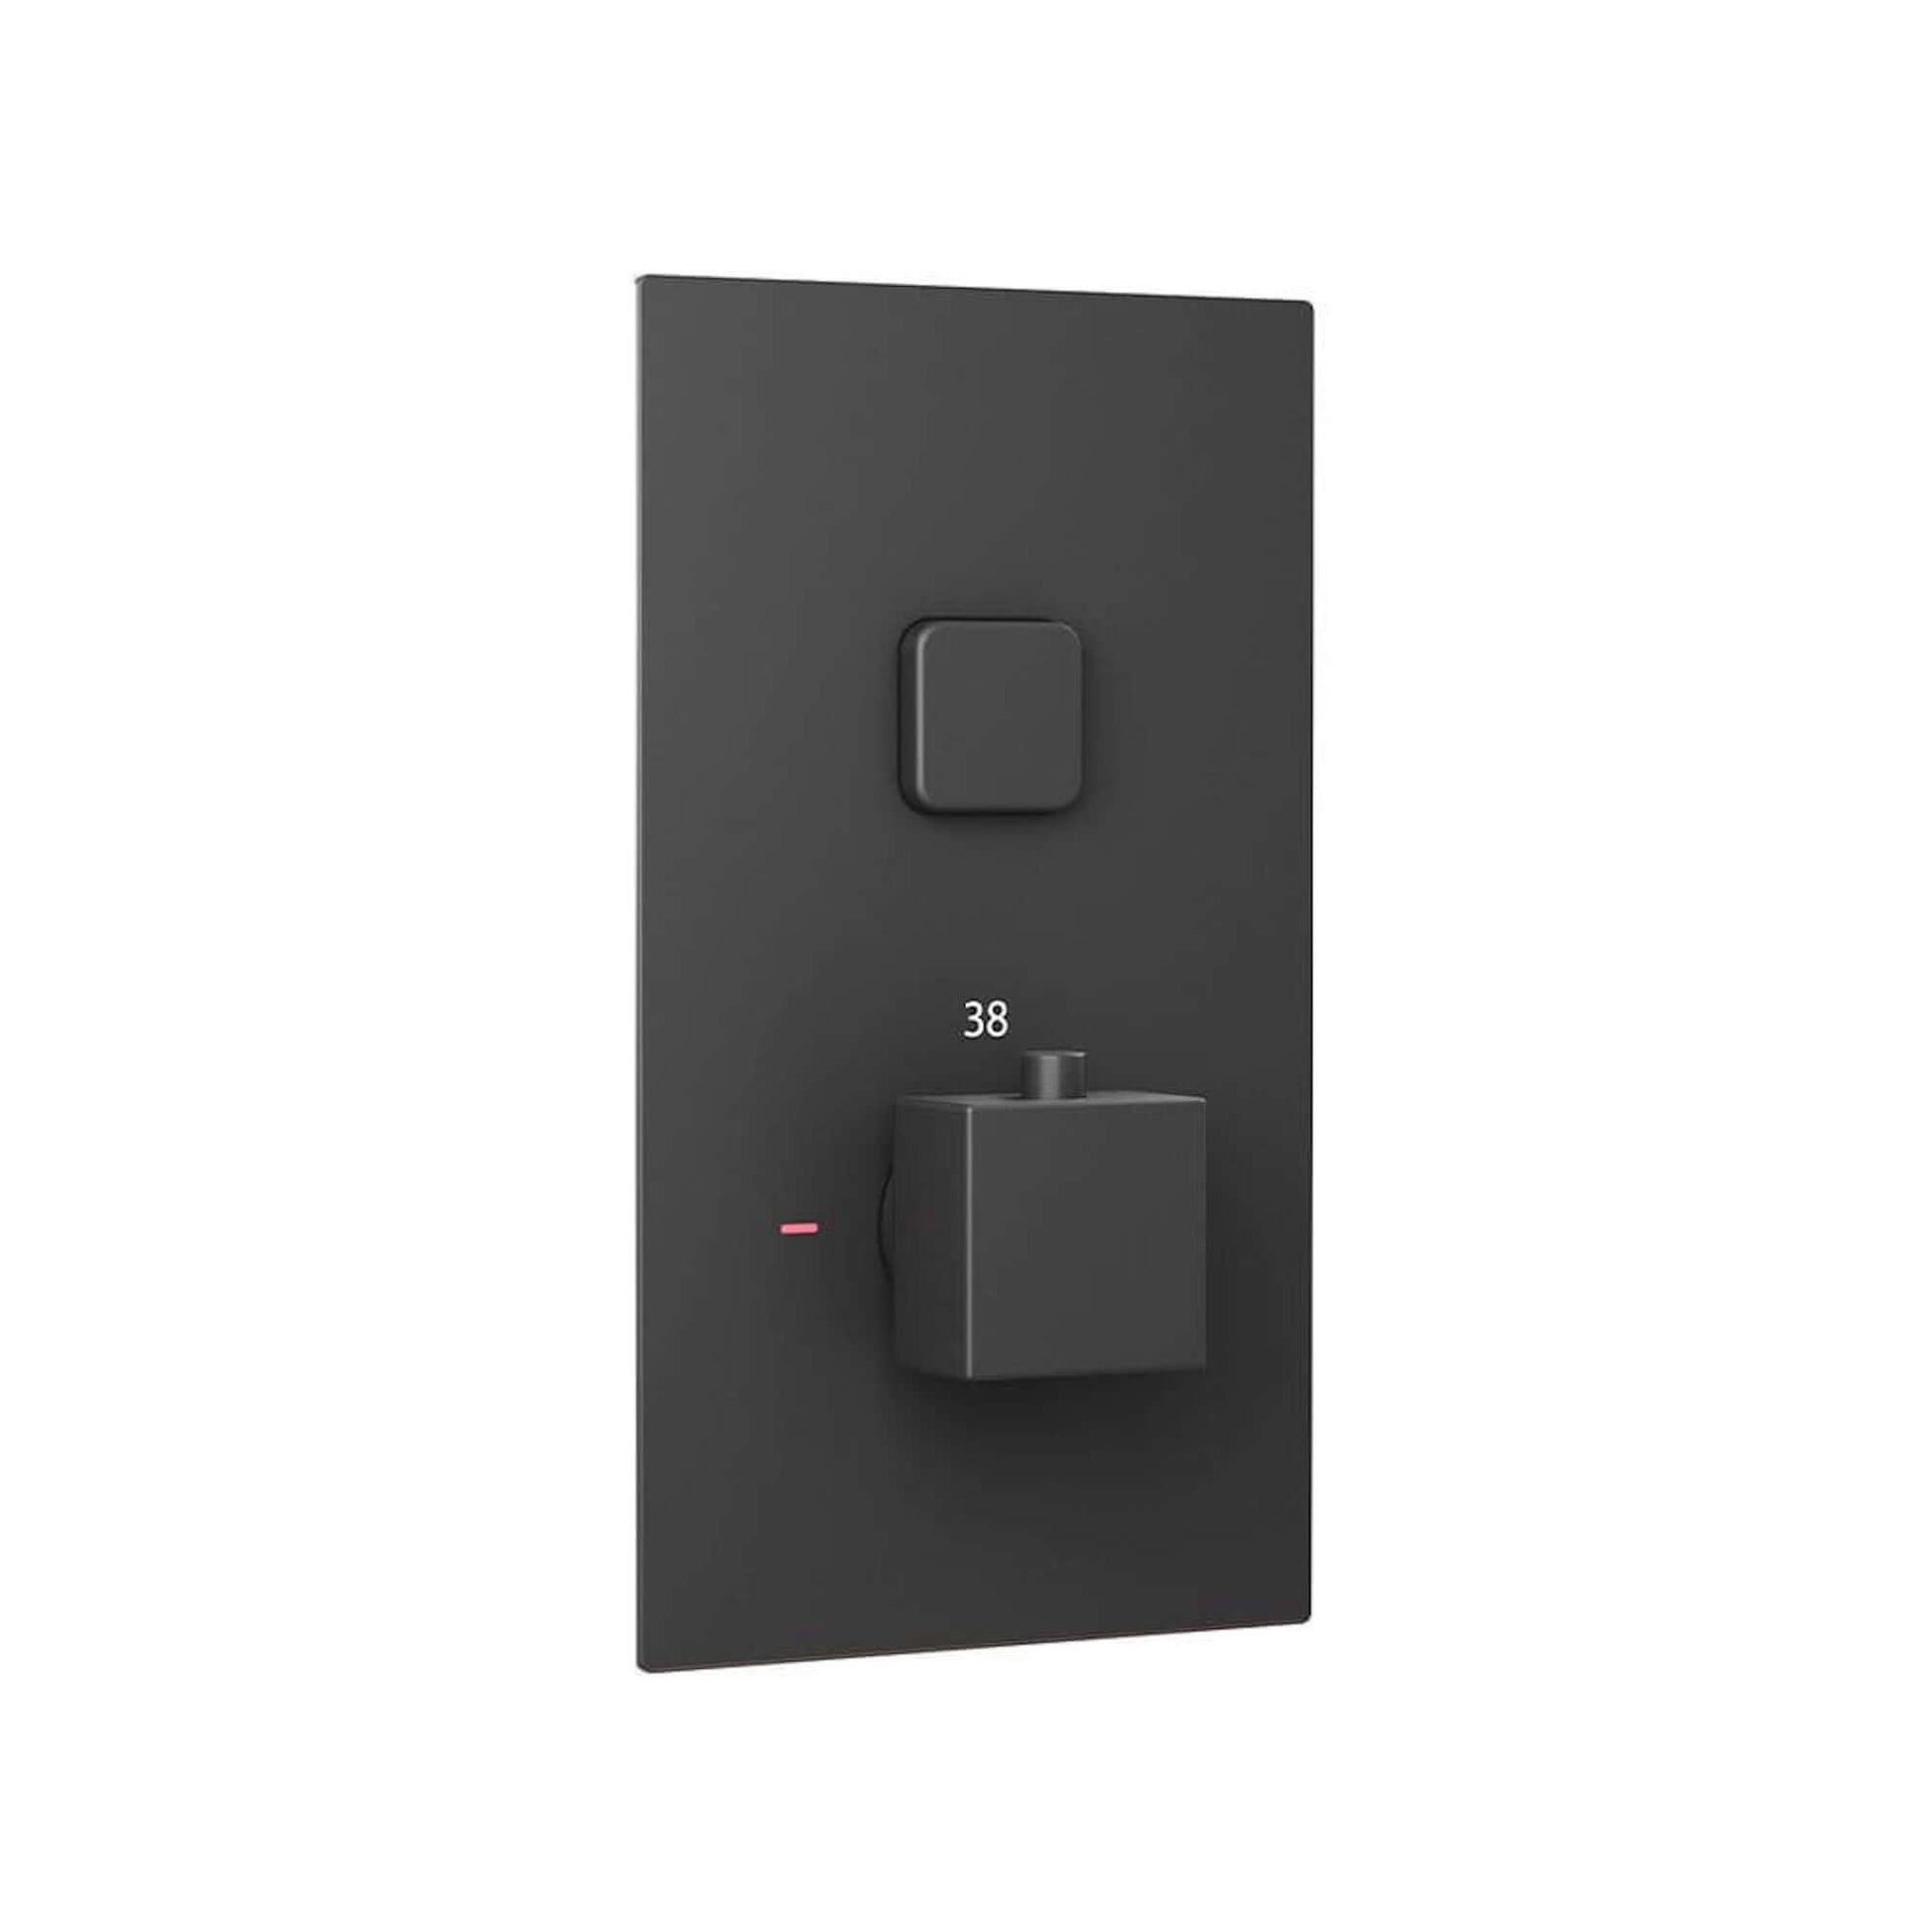 Milan square push button concealed thermostatic shower valve with 1 outlet - black - Showers